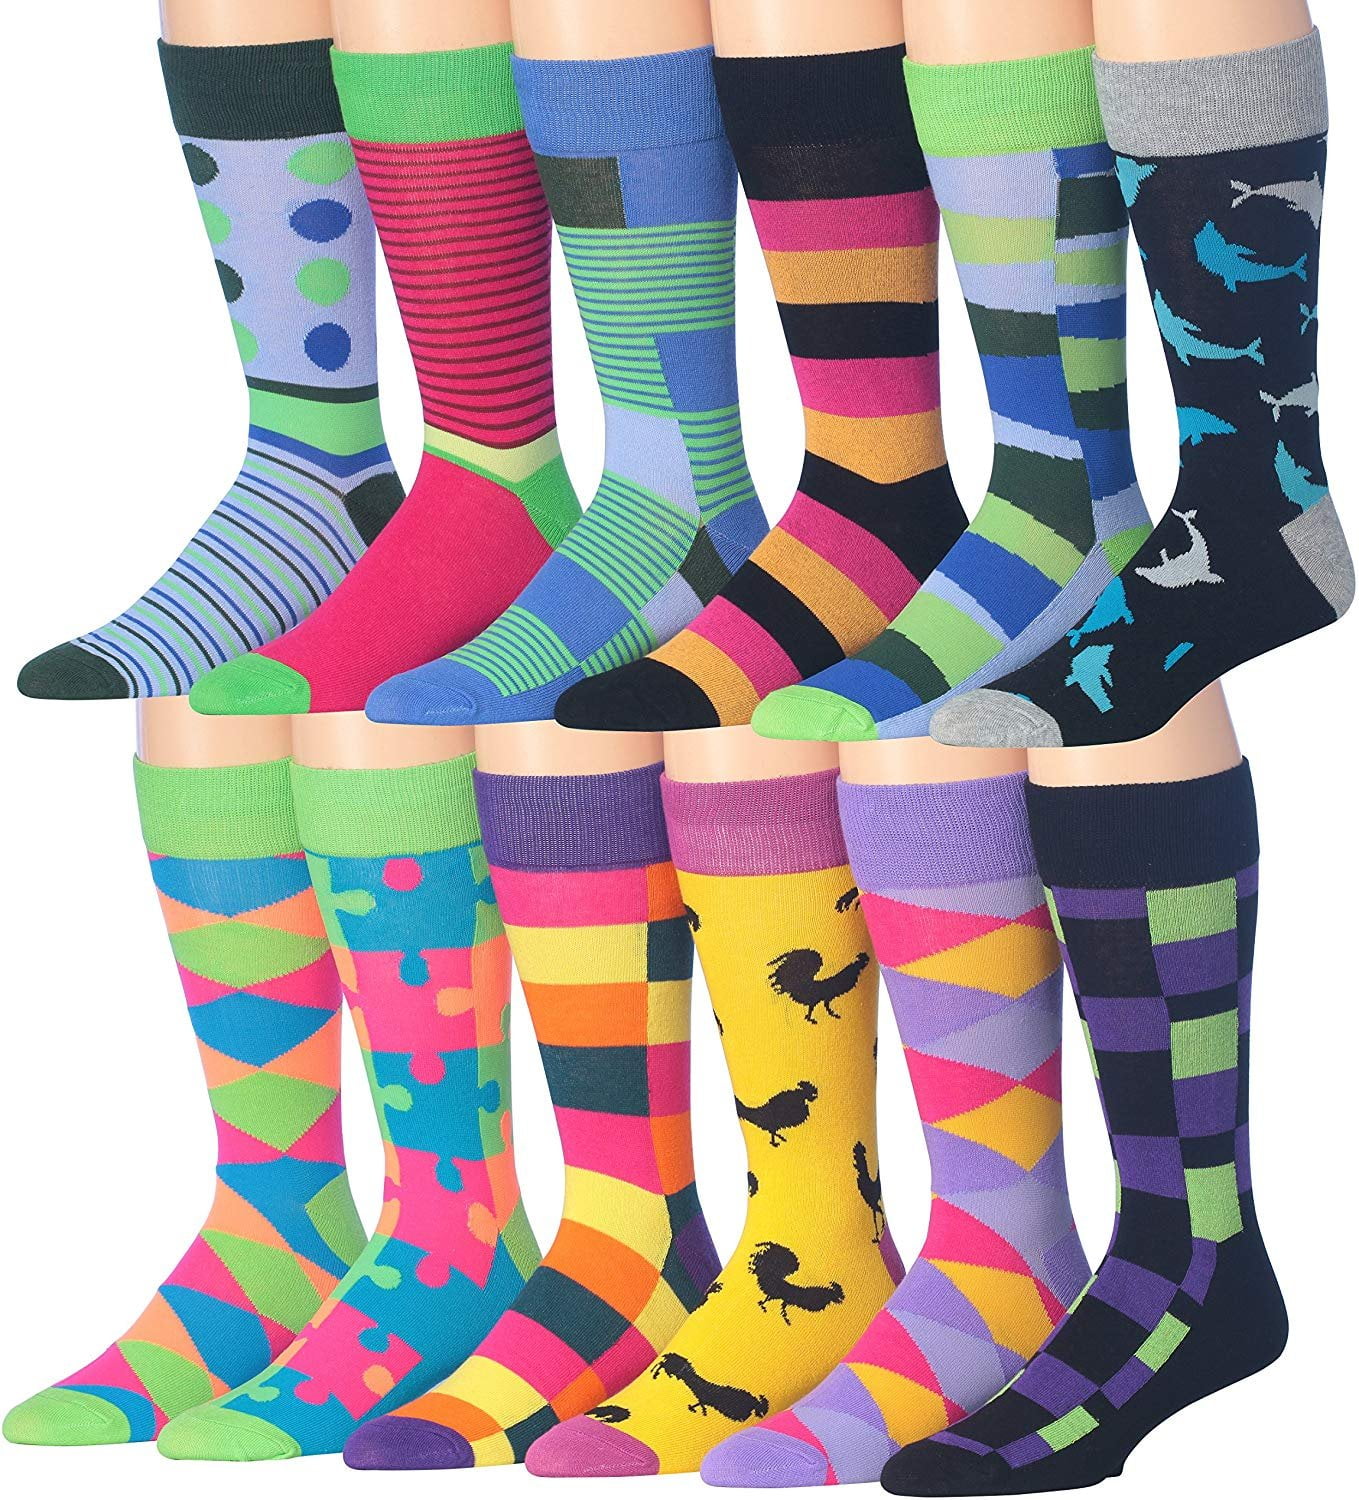 Colorfut Men's 12 Pairs Soft Cotton Colorful Funky Gift Box Dress Socks ...